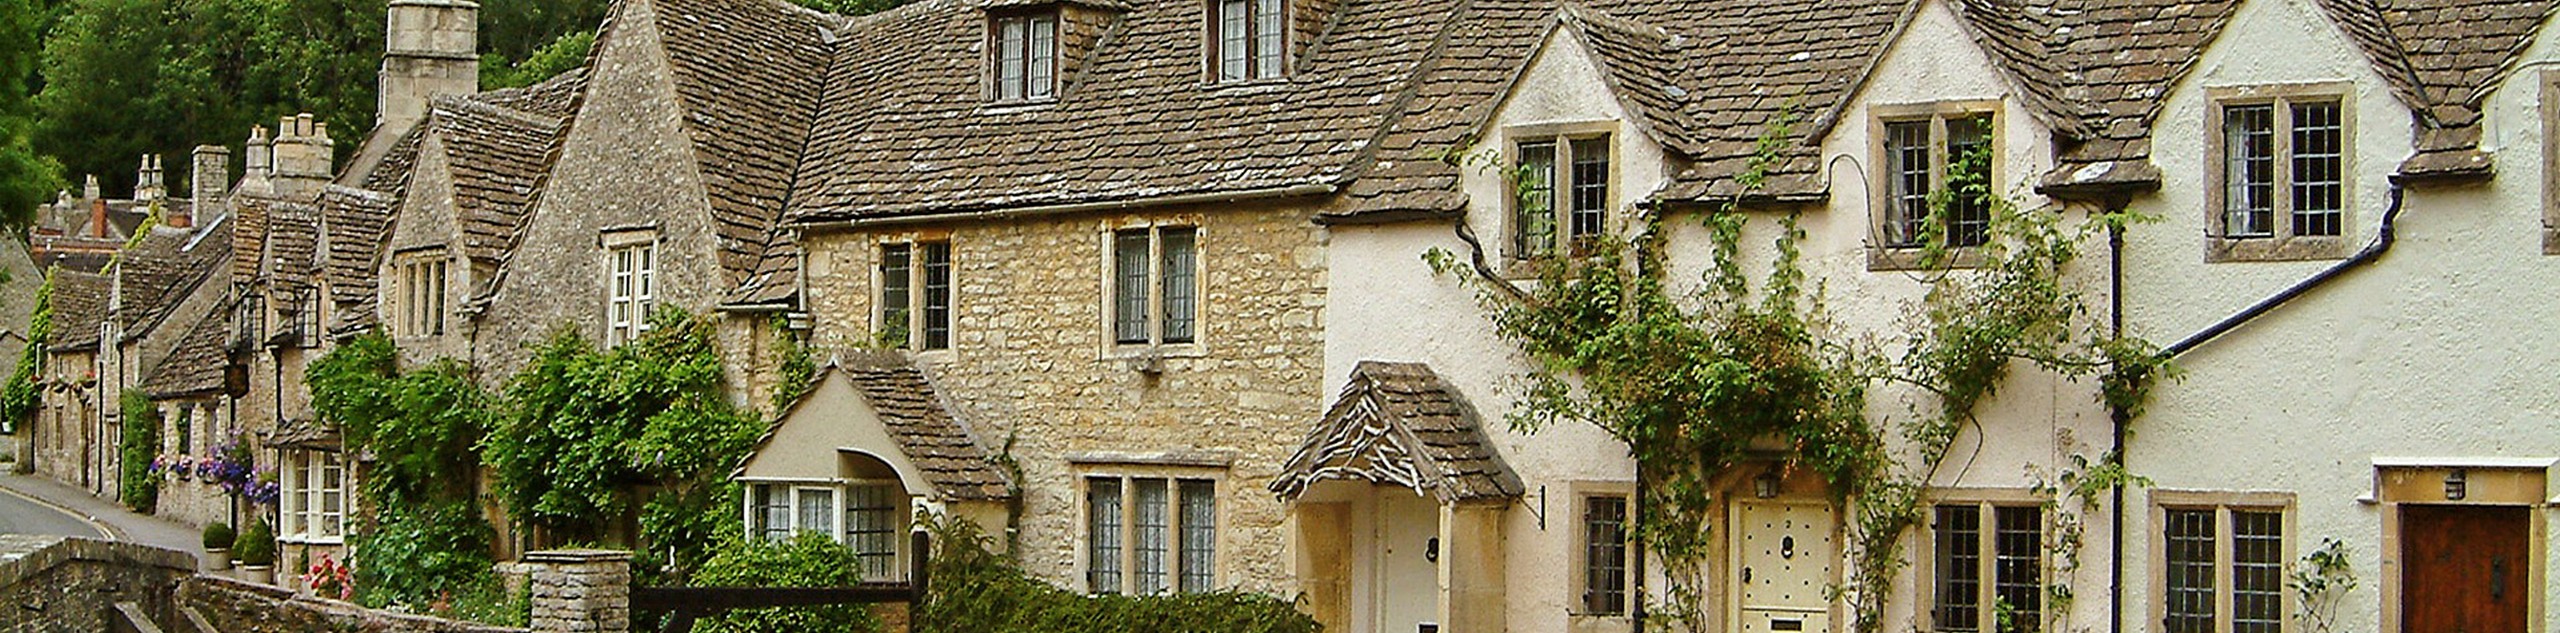 Castle Combe and Nettleton Mill Circular Walk